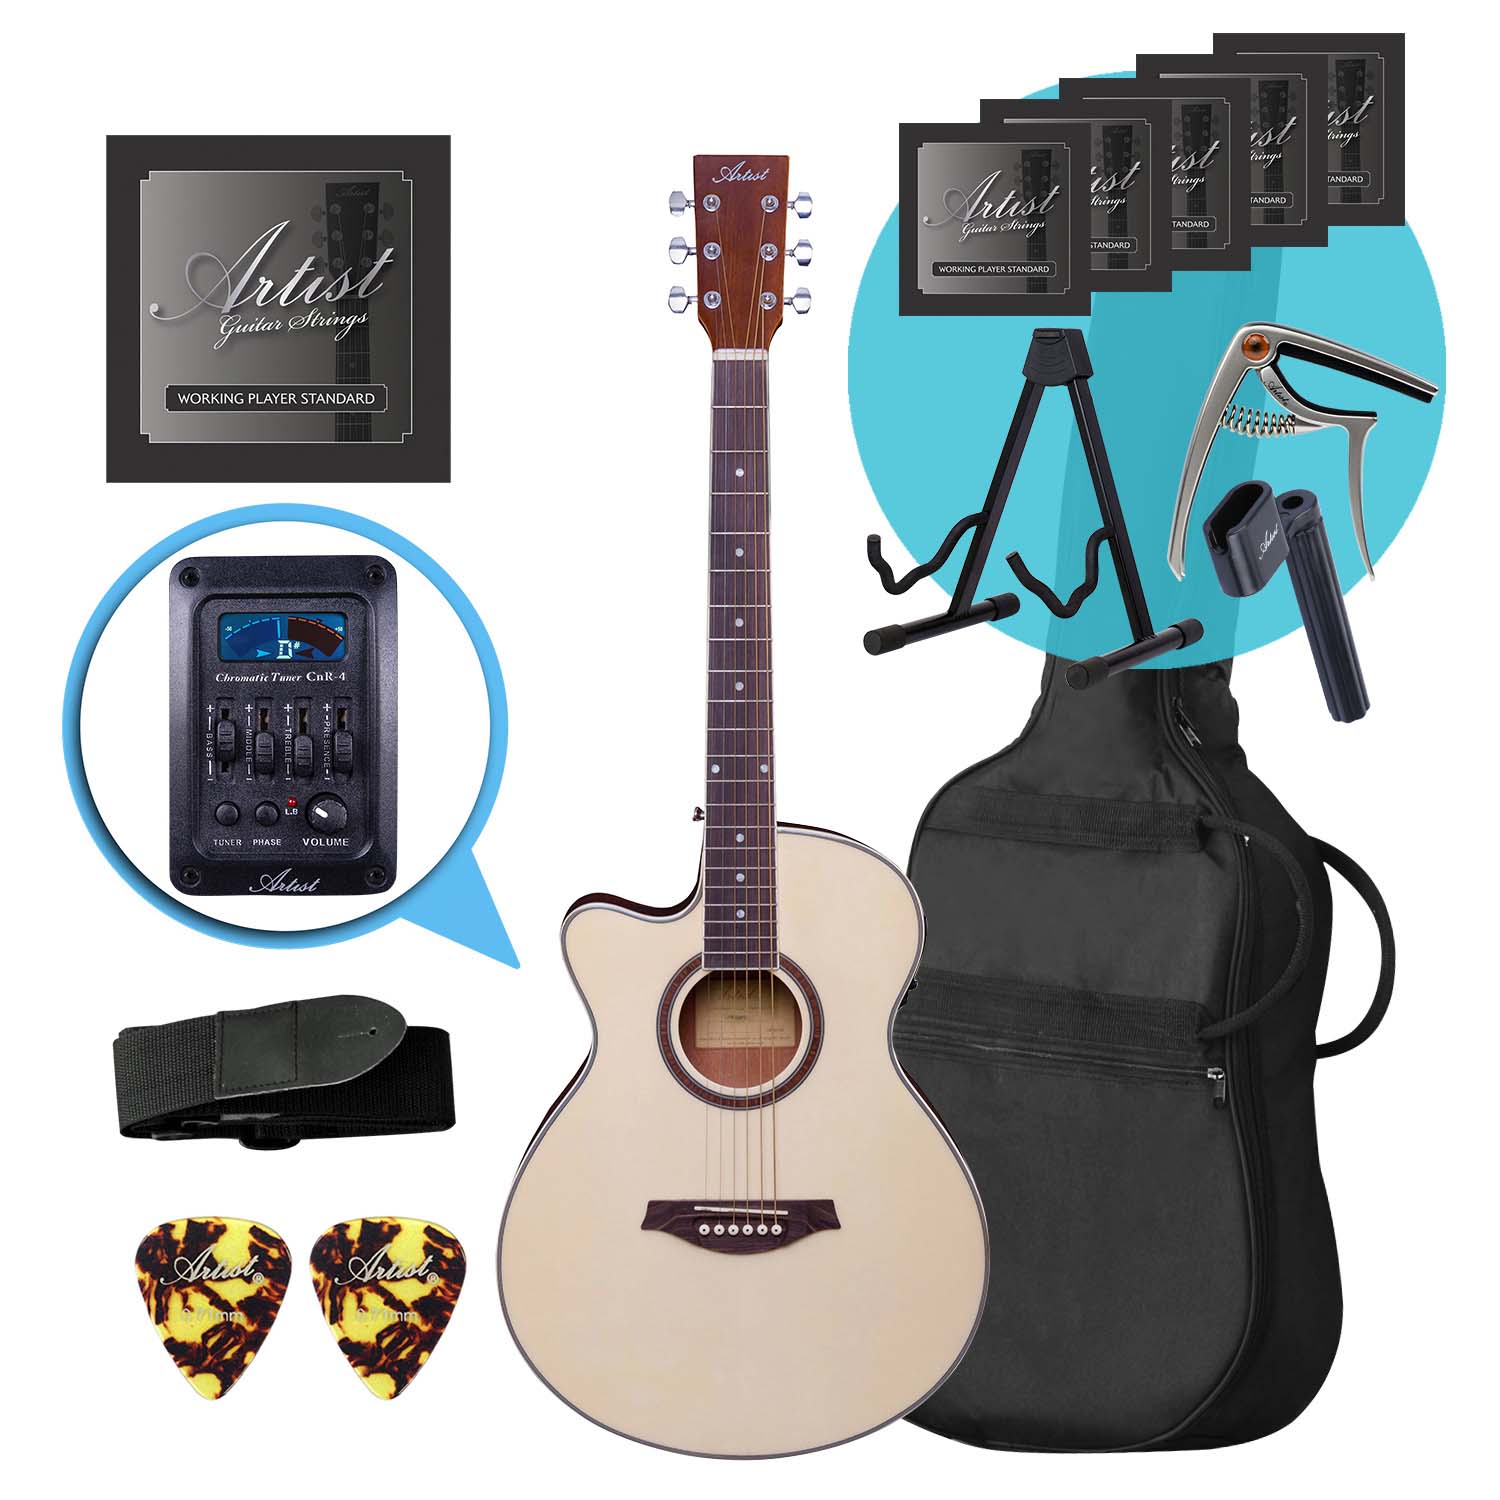 Wood Classical Guitar 30 inch Acoustic Guitar Bundle for Kids 1/2 Half Size Wooden classic Guitar 6 Strings with Beginner Kit for Students Adults Beginners 